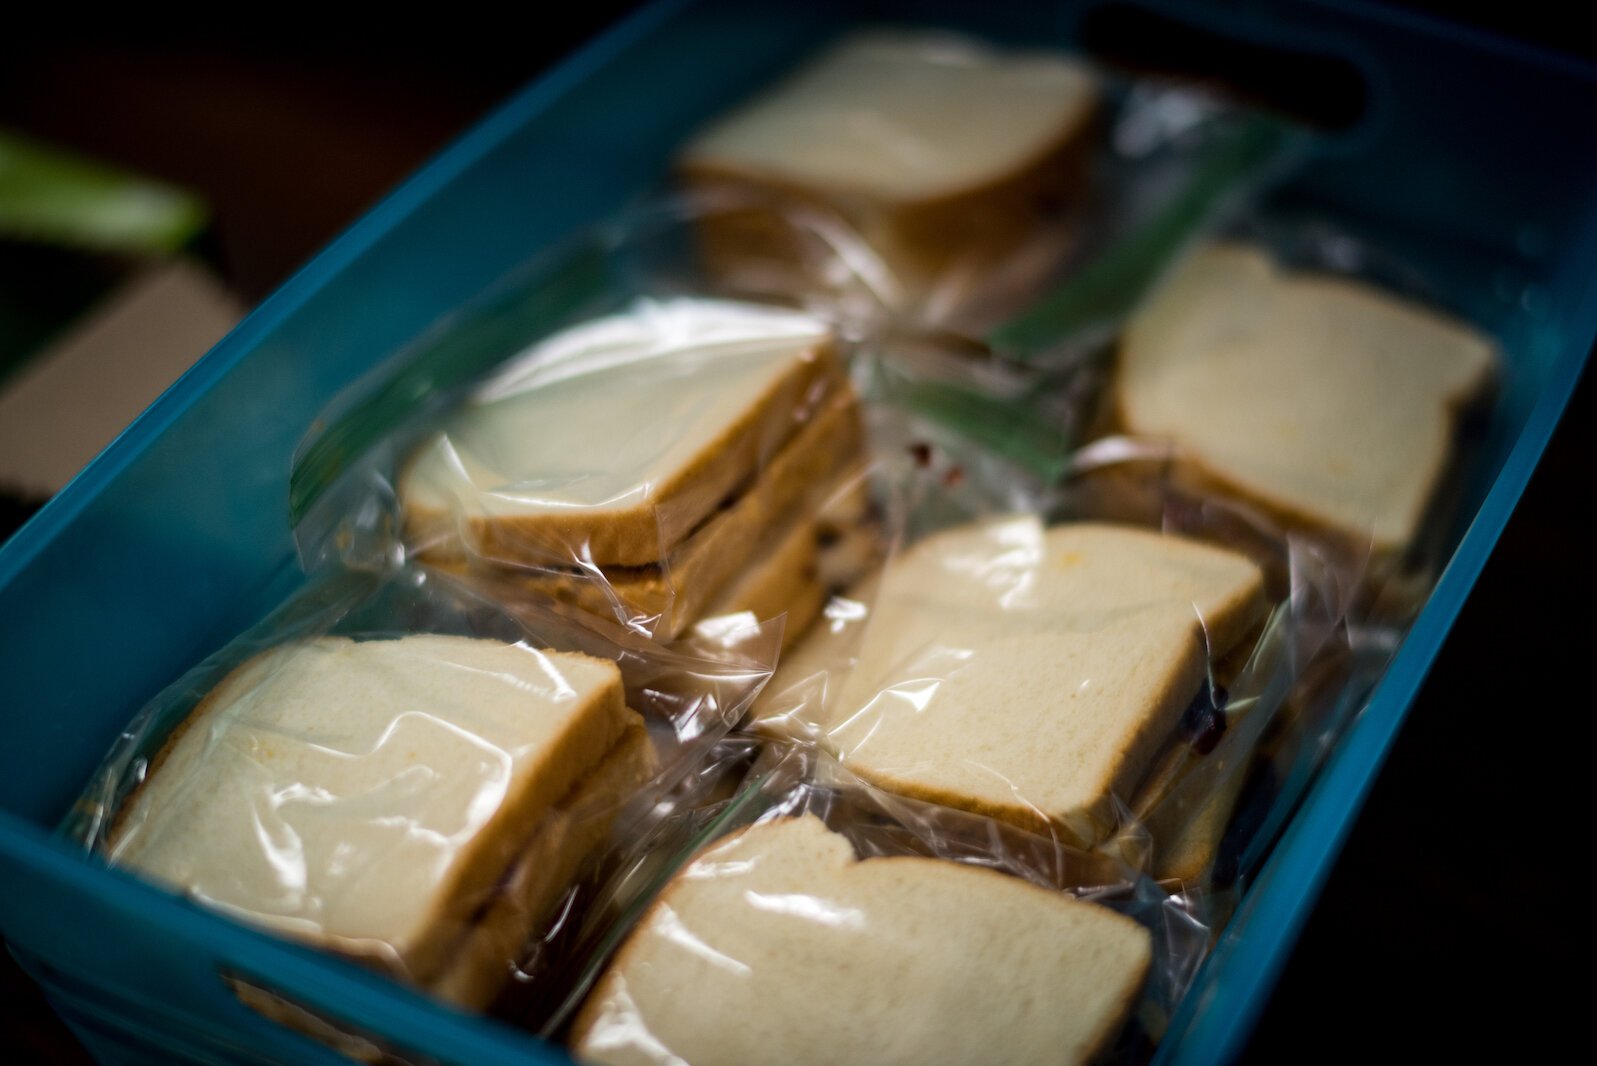 Sandwiches are prepared  for Kalamazoo's homeless.